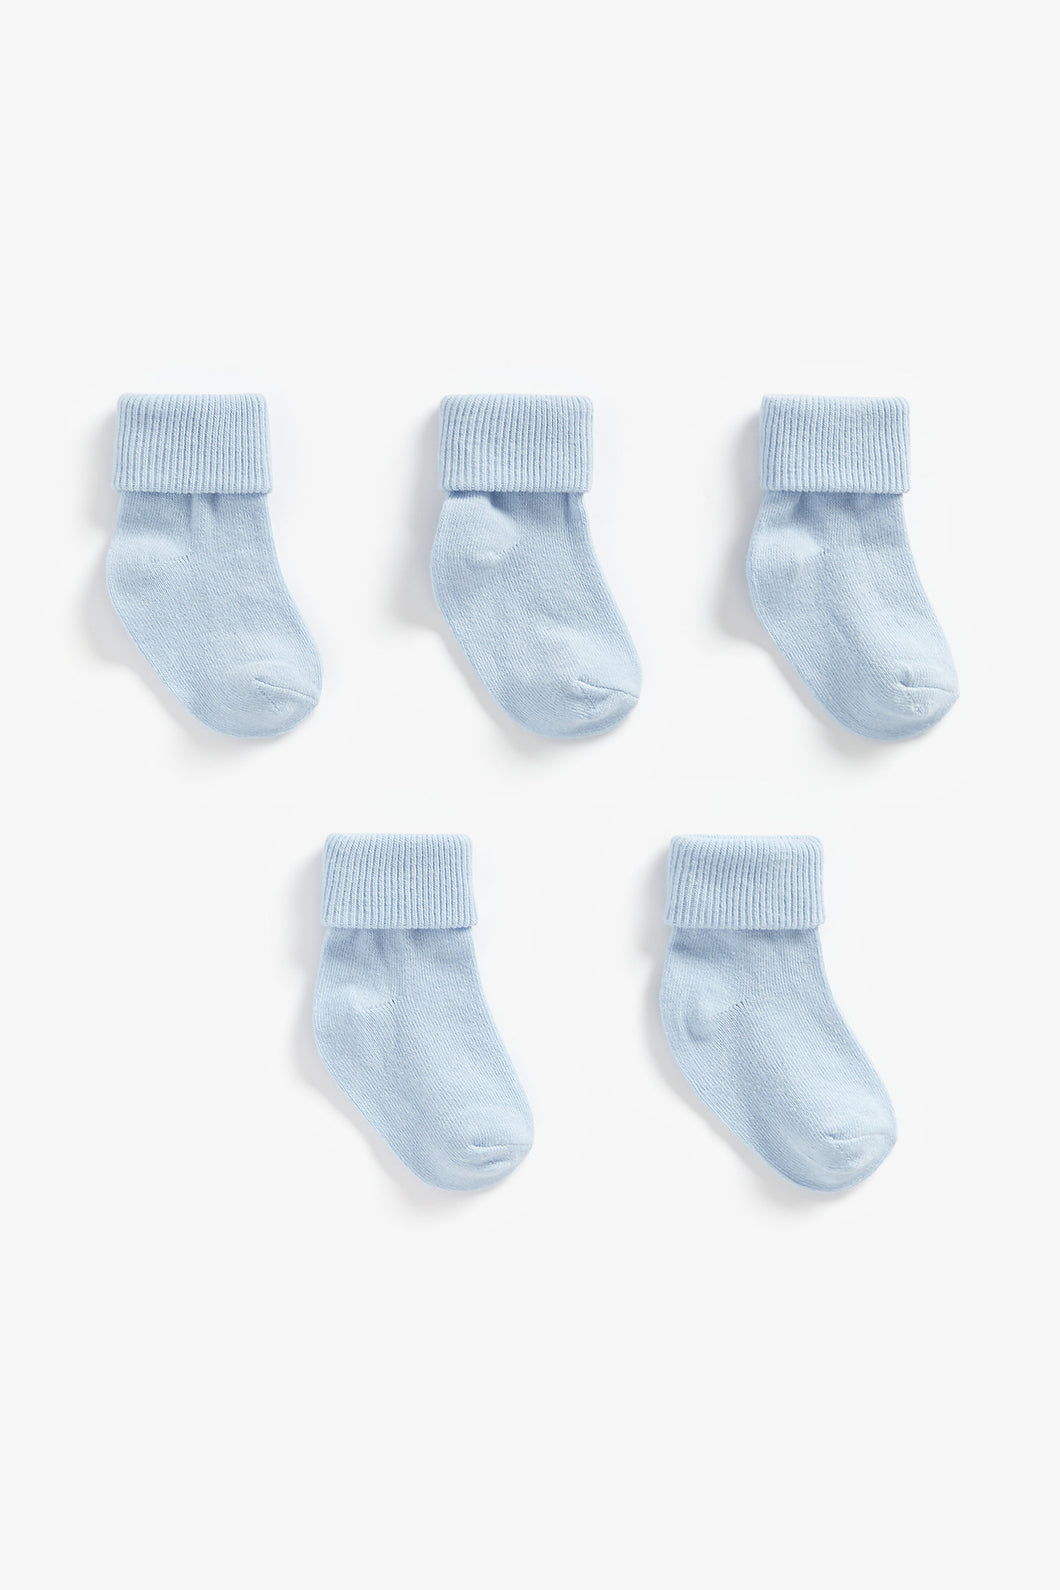 Mothercare Blue Turn-Over-Top Baby Socks - 5 Pack